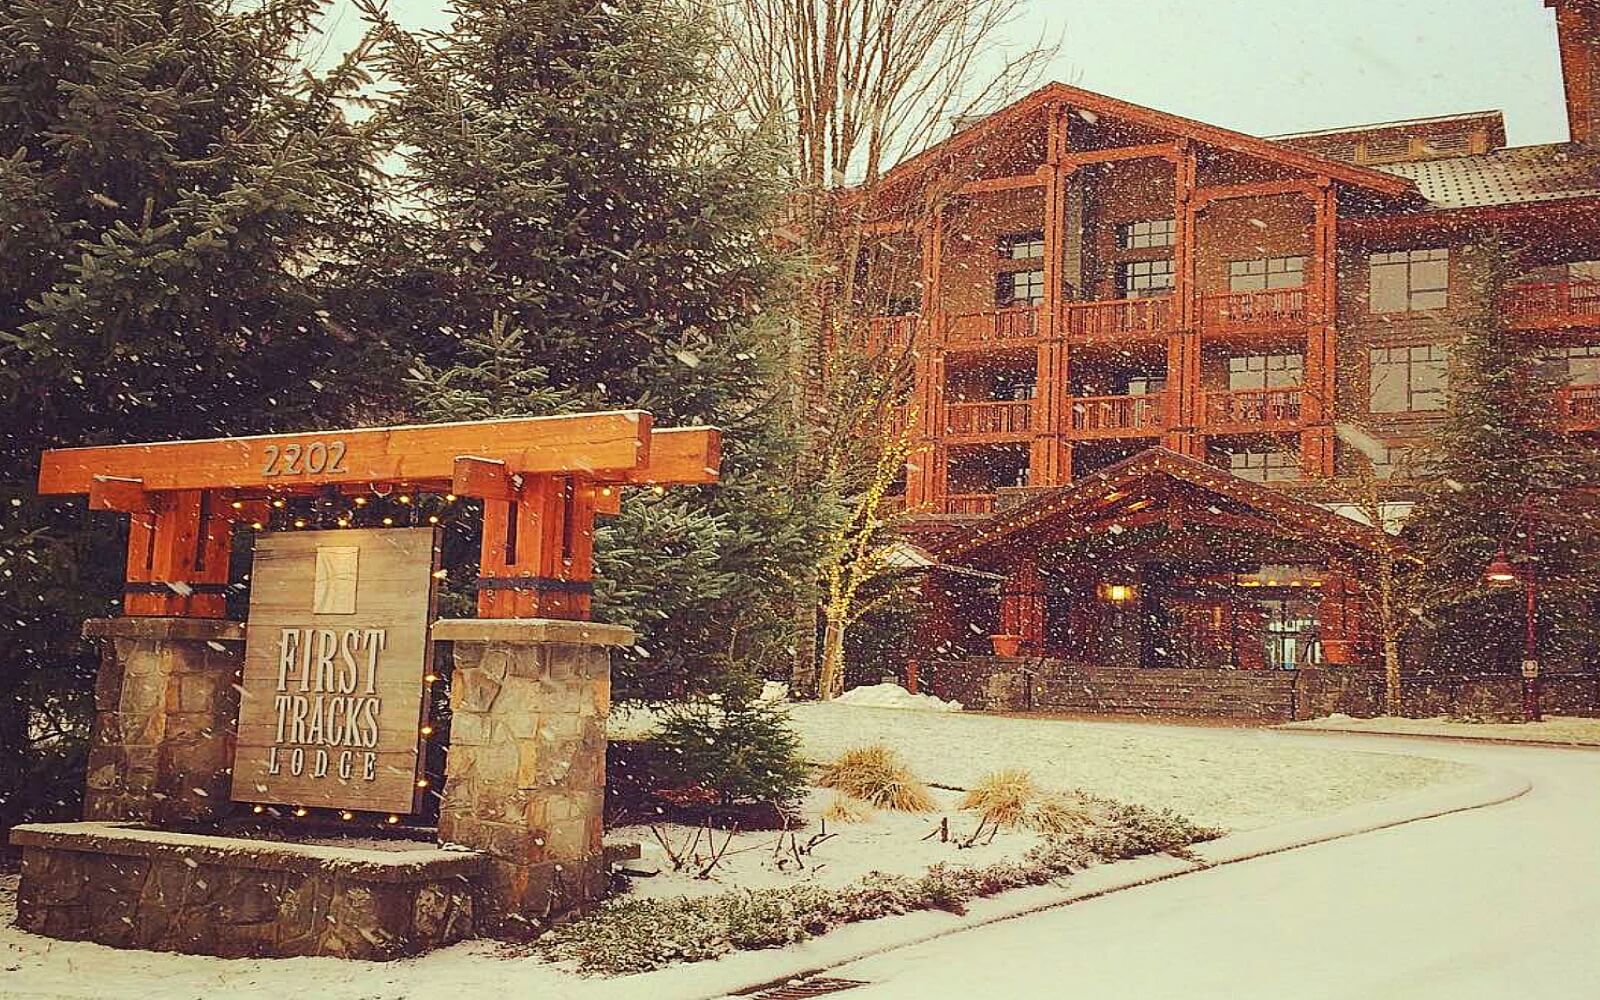 The entrance to the First Track Lodge, Whistler